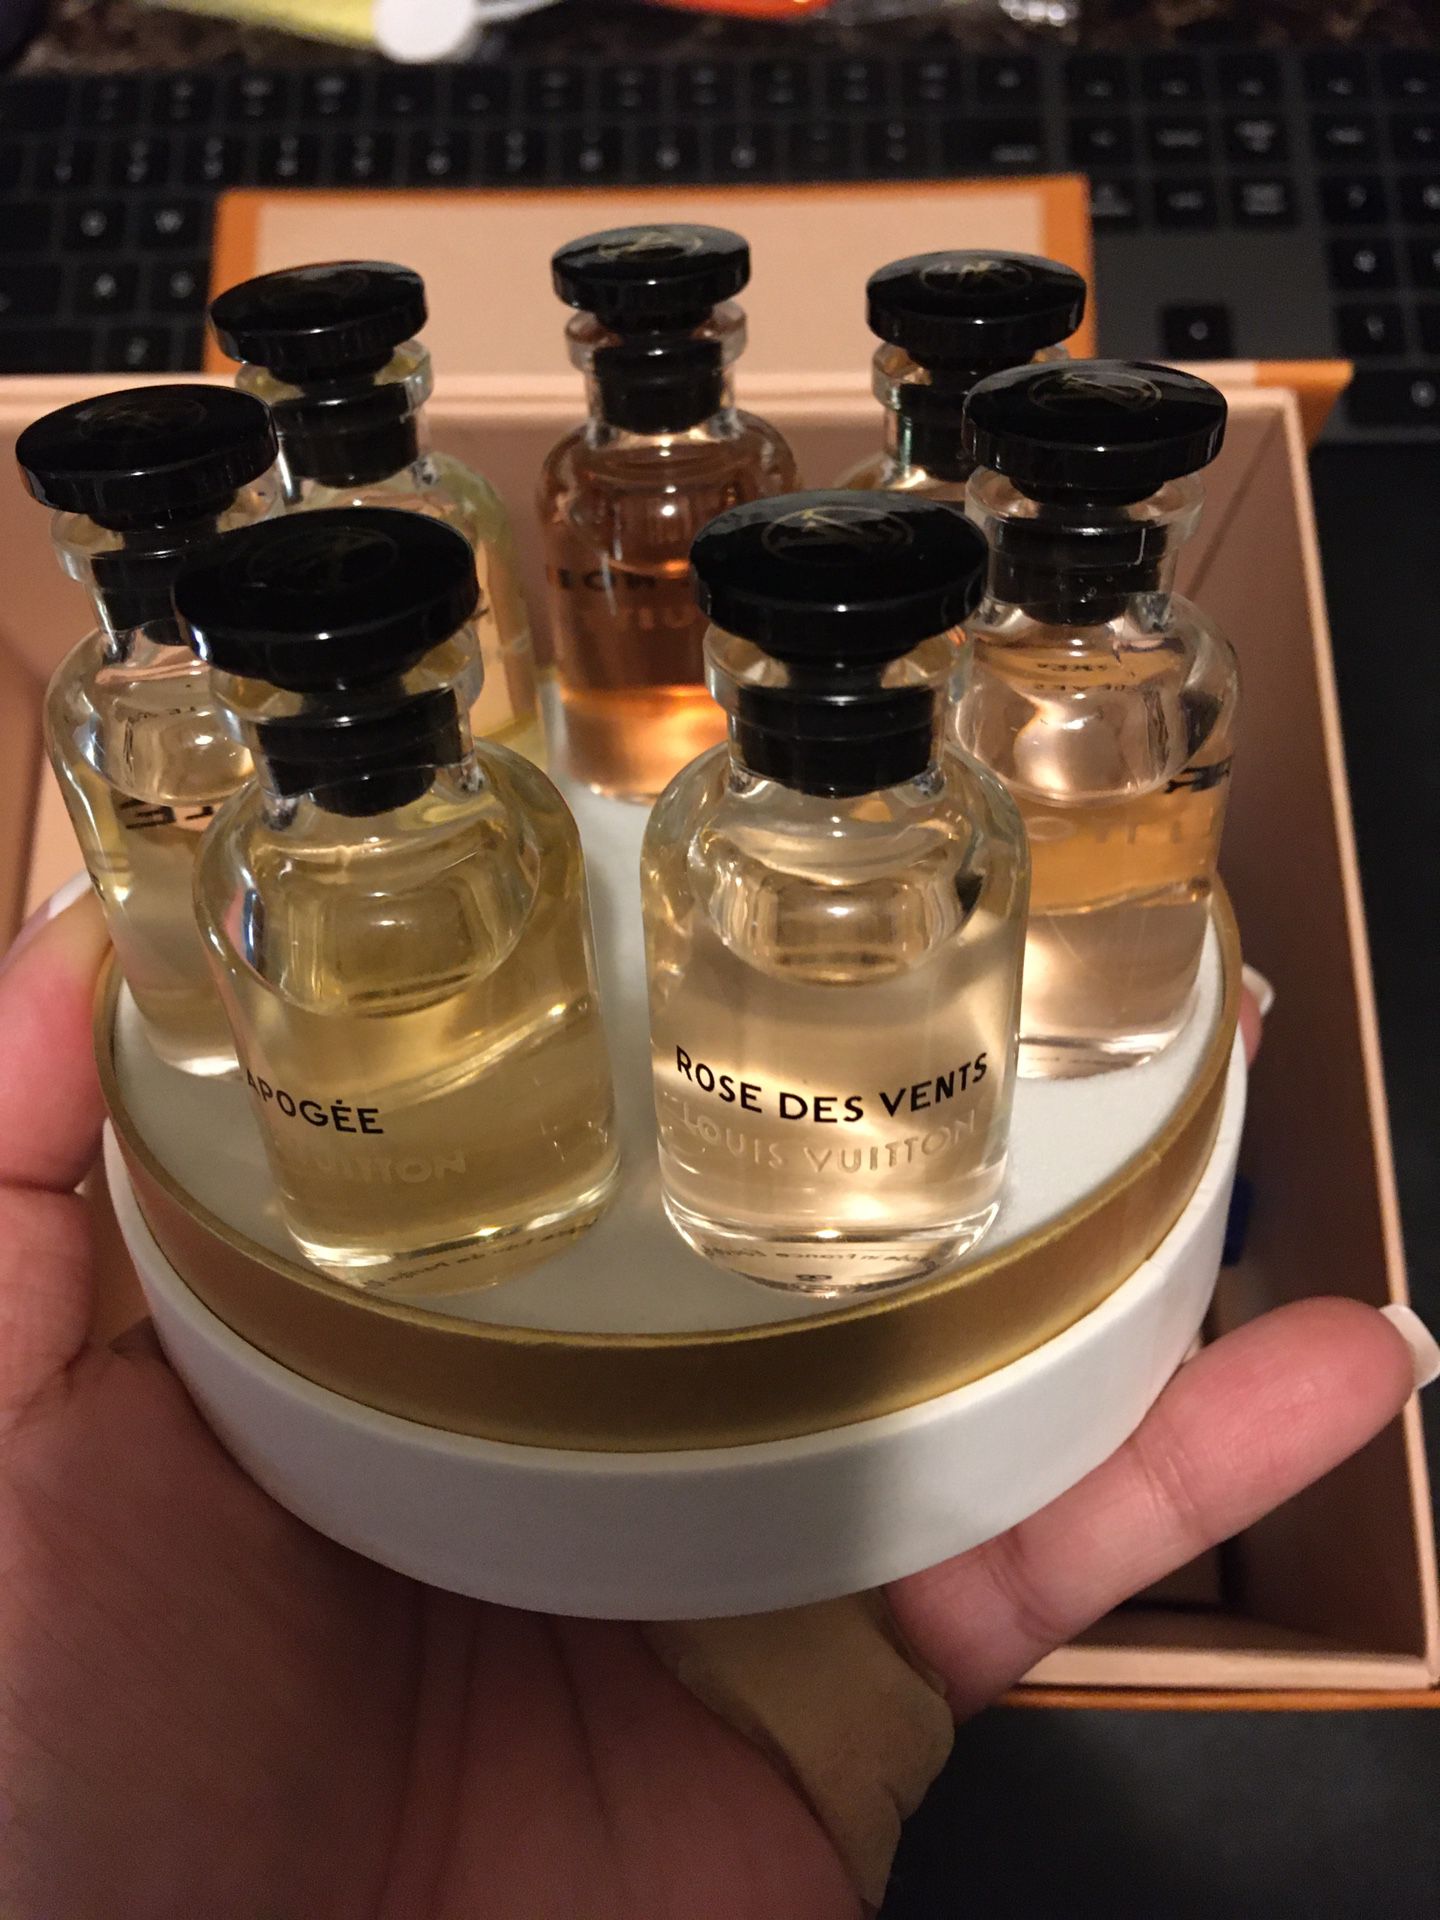 Atrape Reves- Louis Vuitton Perfume Women for Sale in Queens, NY - OfferUp